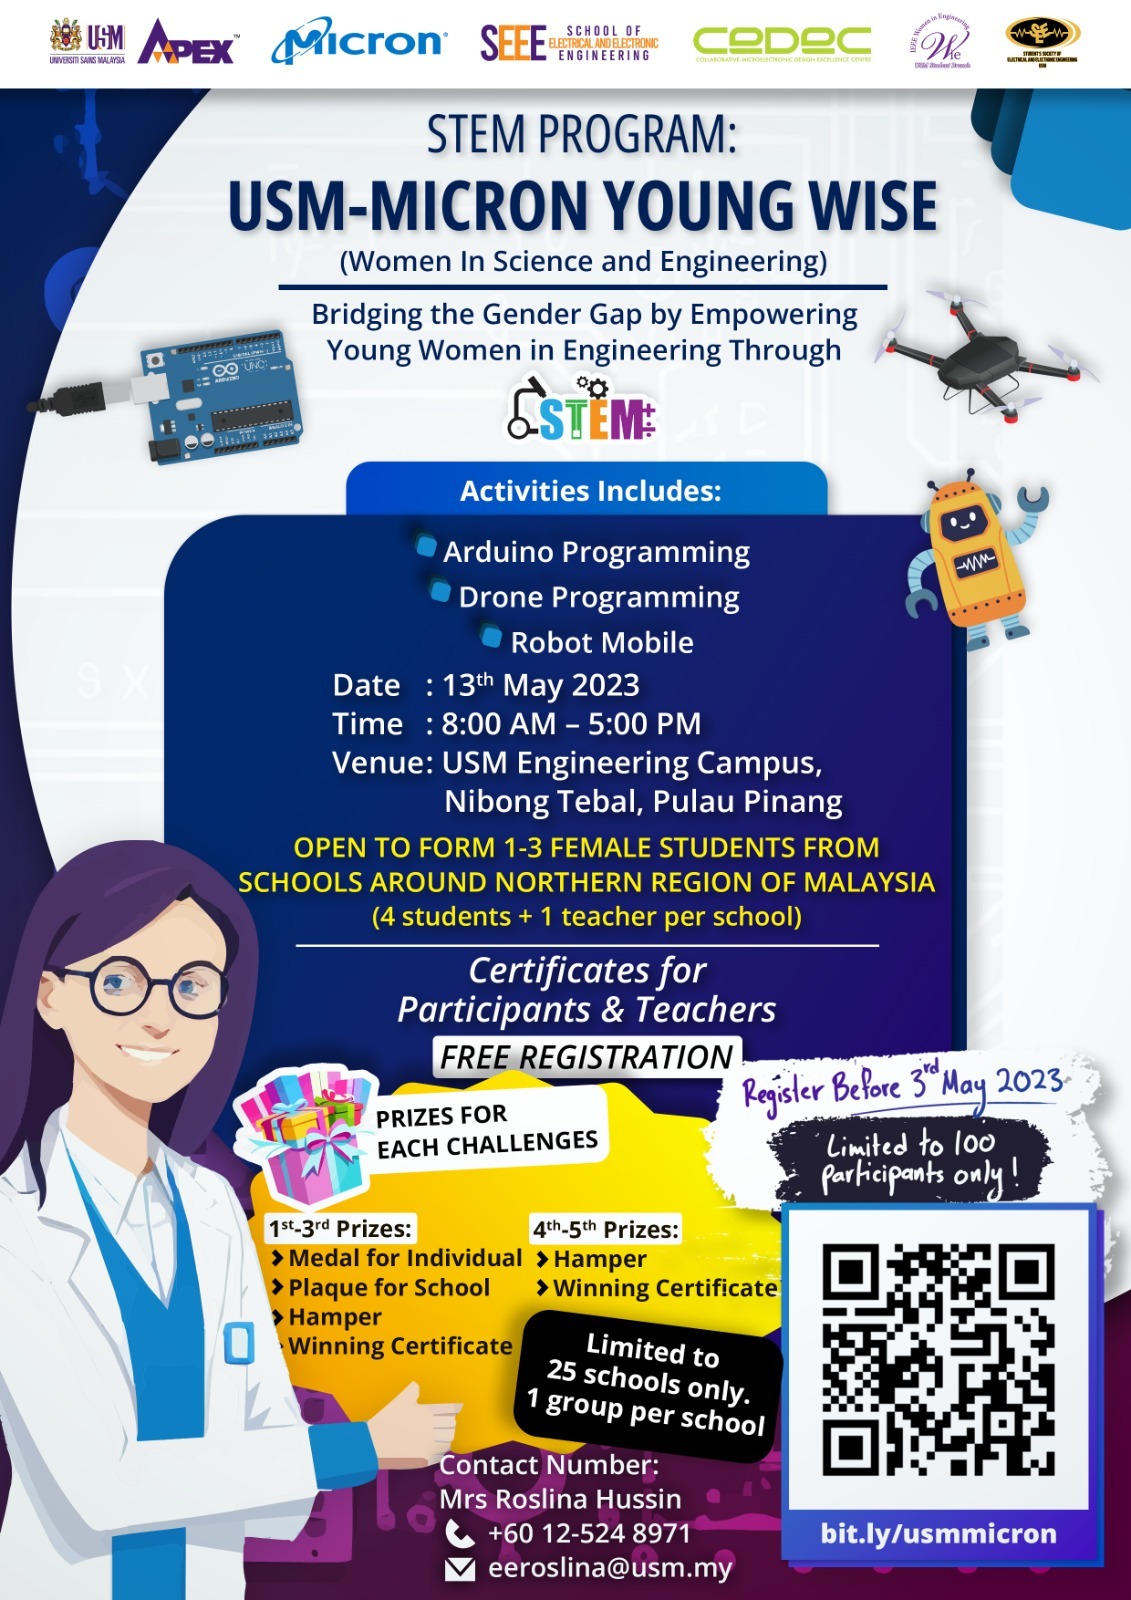 2023 0412 Poster STEM Program USM MICRON YOUNG WISE